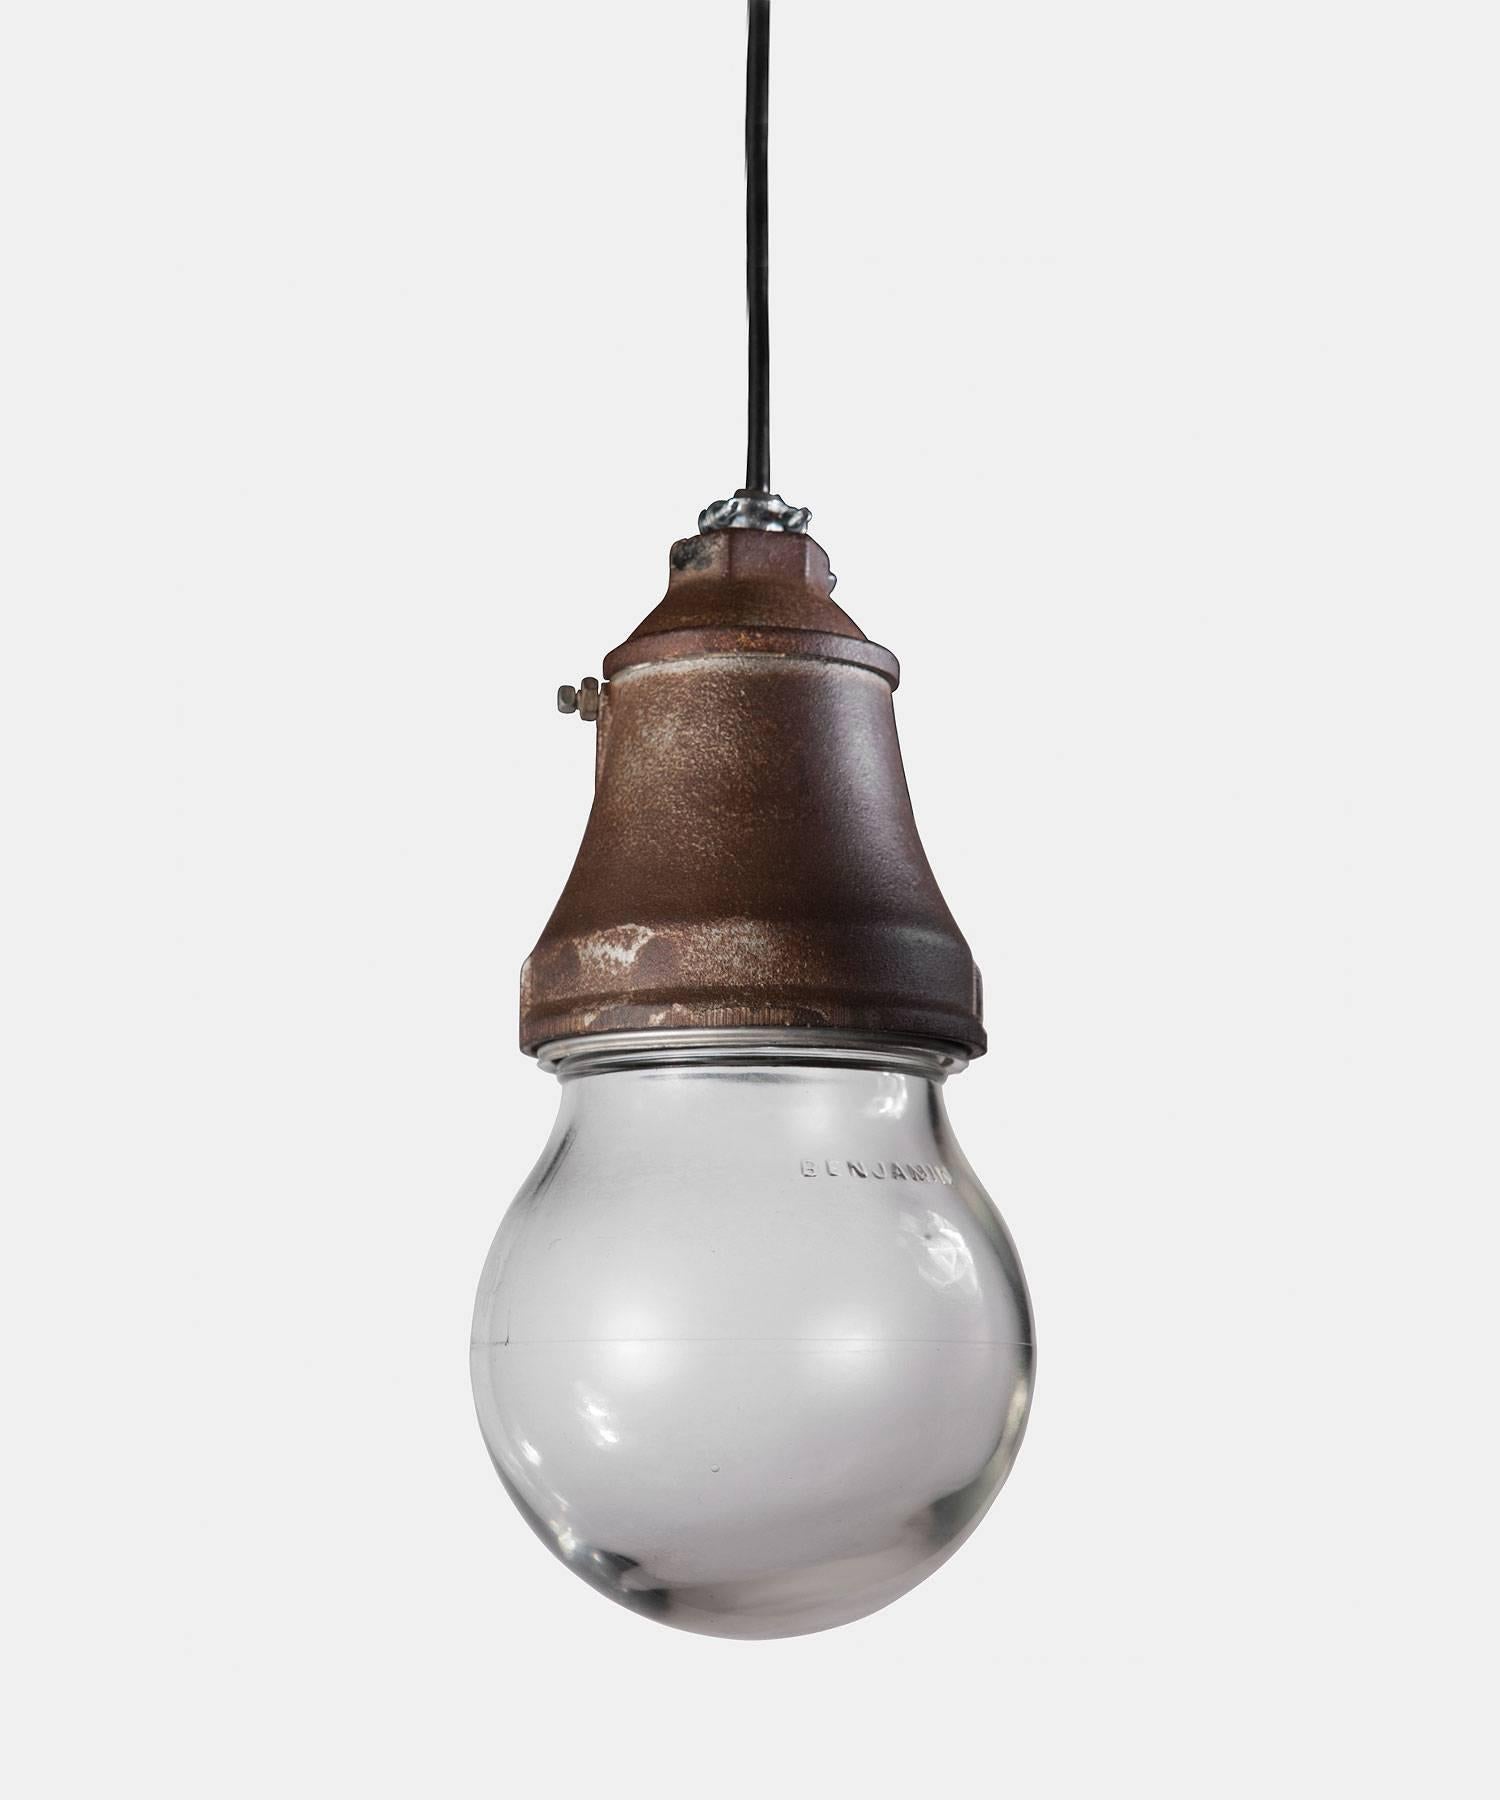 Mini Oxidized Iron Explosion Proof Industrial Pendant, America, 21st century

With heavy iron fitter and original Benjamin glass globe.